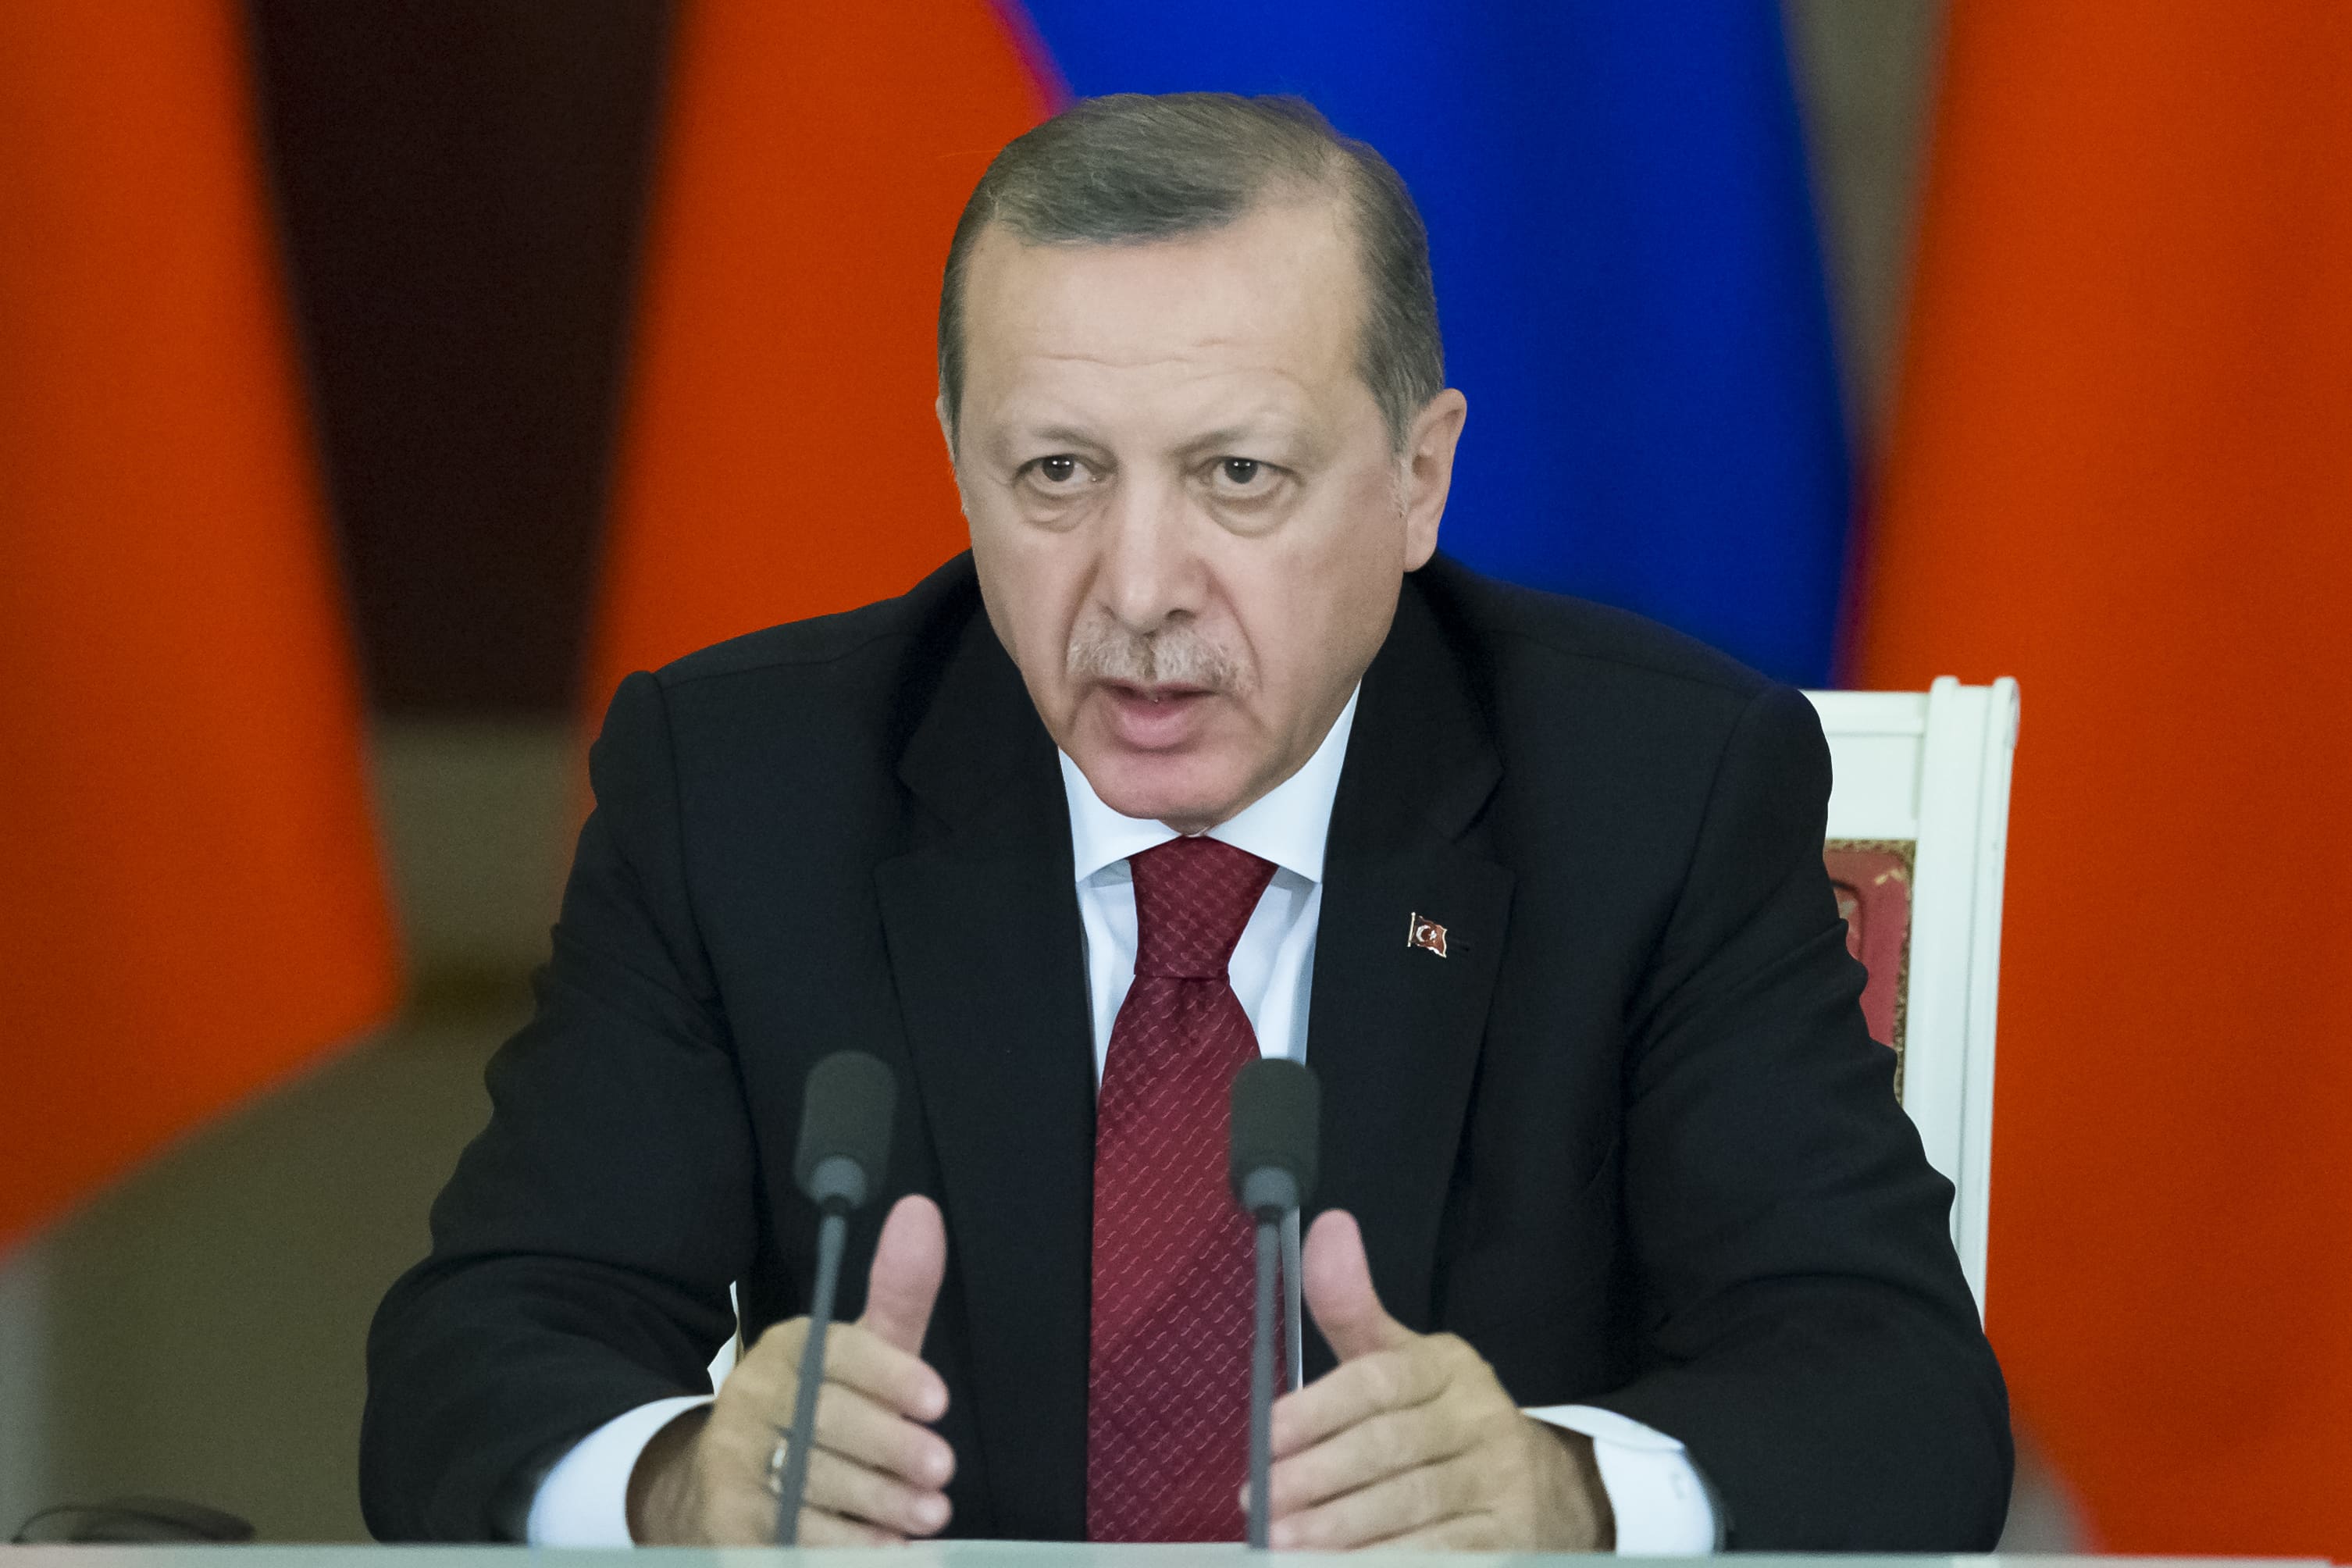 Recep Tayyip Erdogan endorsed Trump’s latest allegations that the CNN television network was guilty of broadcasting “fake news” in its report on ties between the US president and Russia, AP Photo/Alexander Zemlianichenko, pool